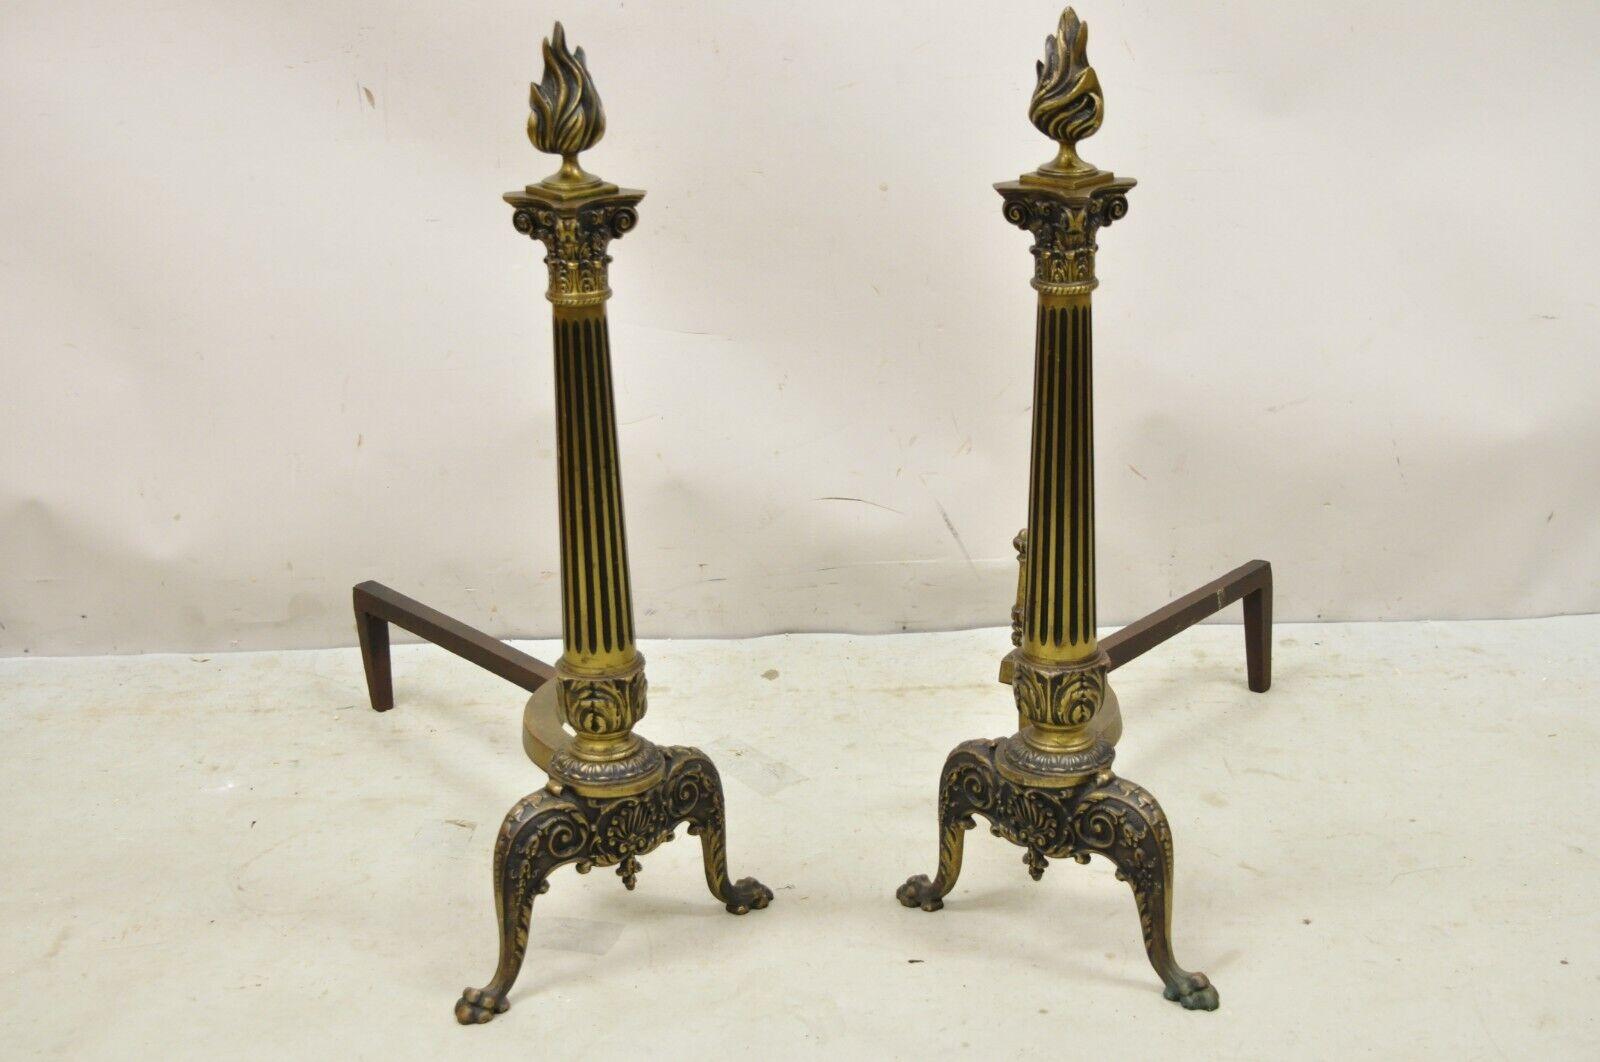 Antique French Empire Style Bronze Column Form Flame Finial Andirons - a Pair. Item features flame finials, reeded column form shafts, paw feet, very nice antique set. Circa Early 1900s. Measurements: 27.5